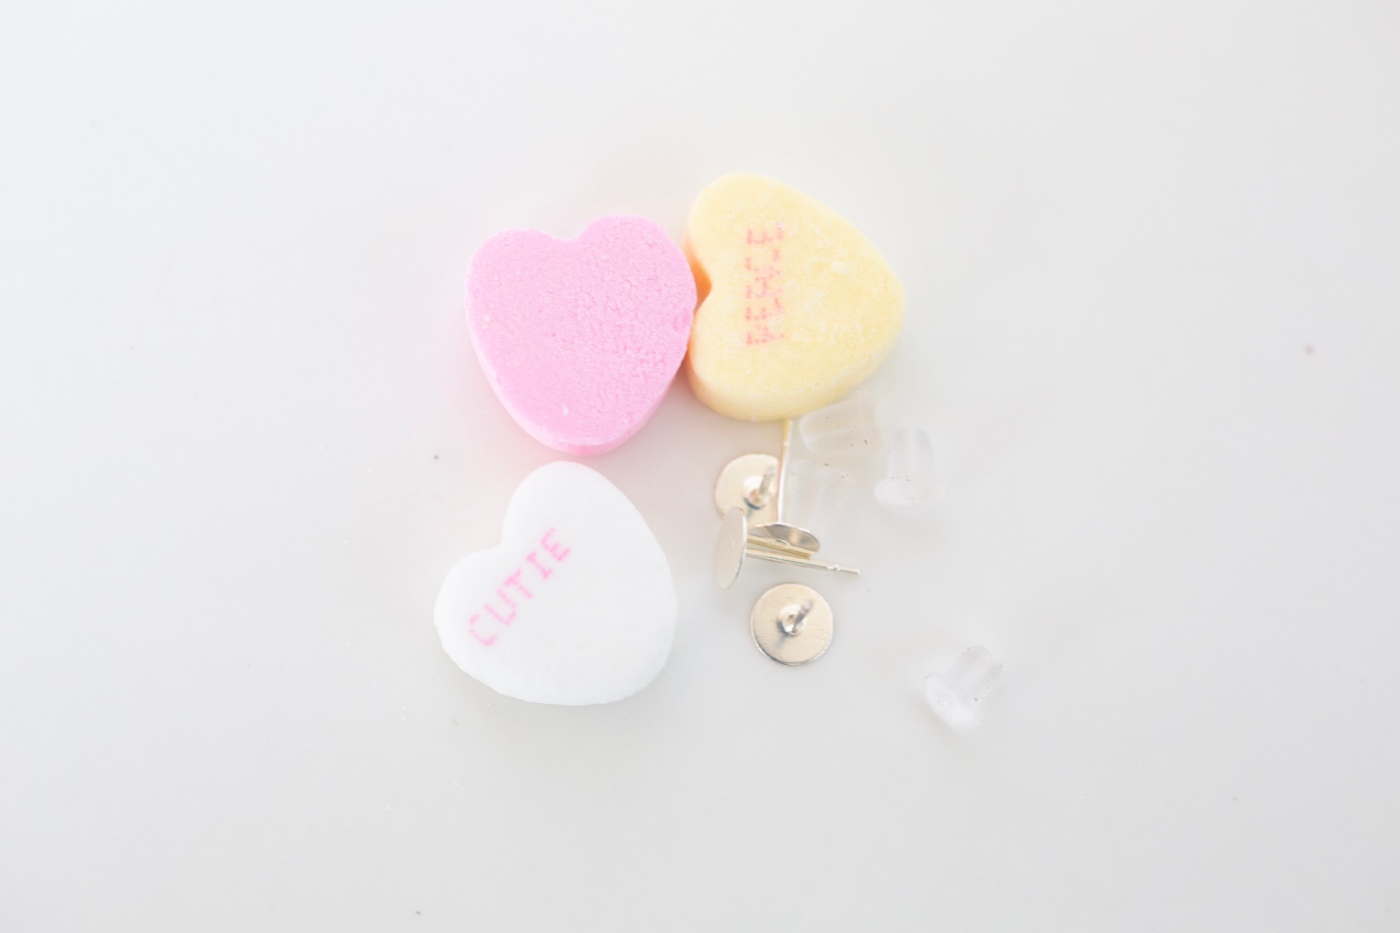 candy and earring blanks for diy conversation heart earrings jewelry